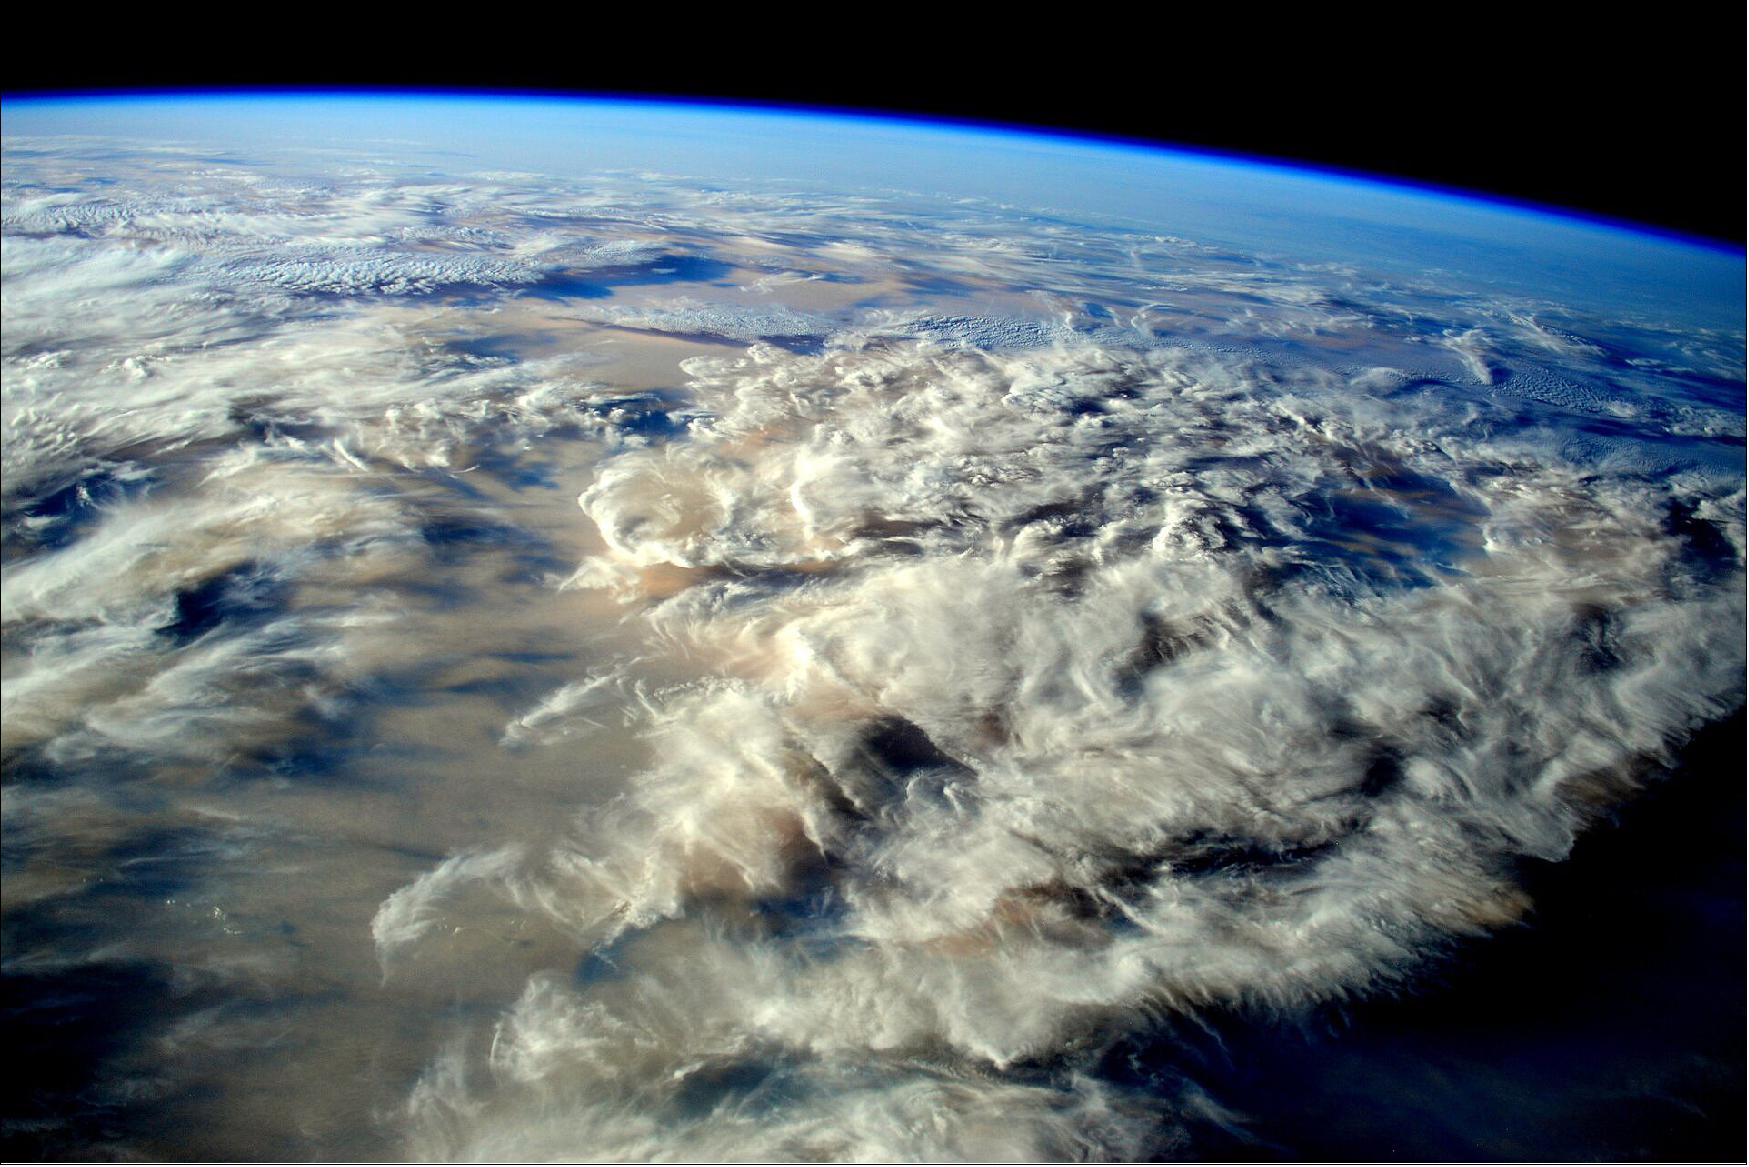 Figure 10: Ecosystem Earth. ESA astronaut Samantha Cristoforetti took this image of our planet from 400 km high on the International Space Station in January 2015. She commented simply: “Good night from space.” The blue haze seen on the curved horizon is our thin atmosphere that provides the air we breathe and protection from space radiation (image credit: ESA/NASA)